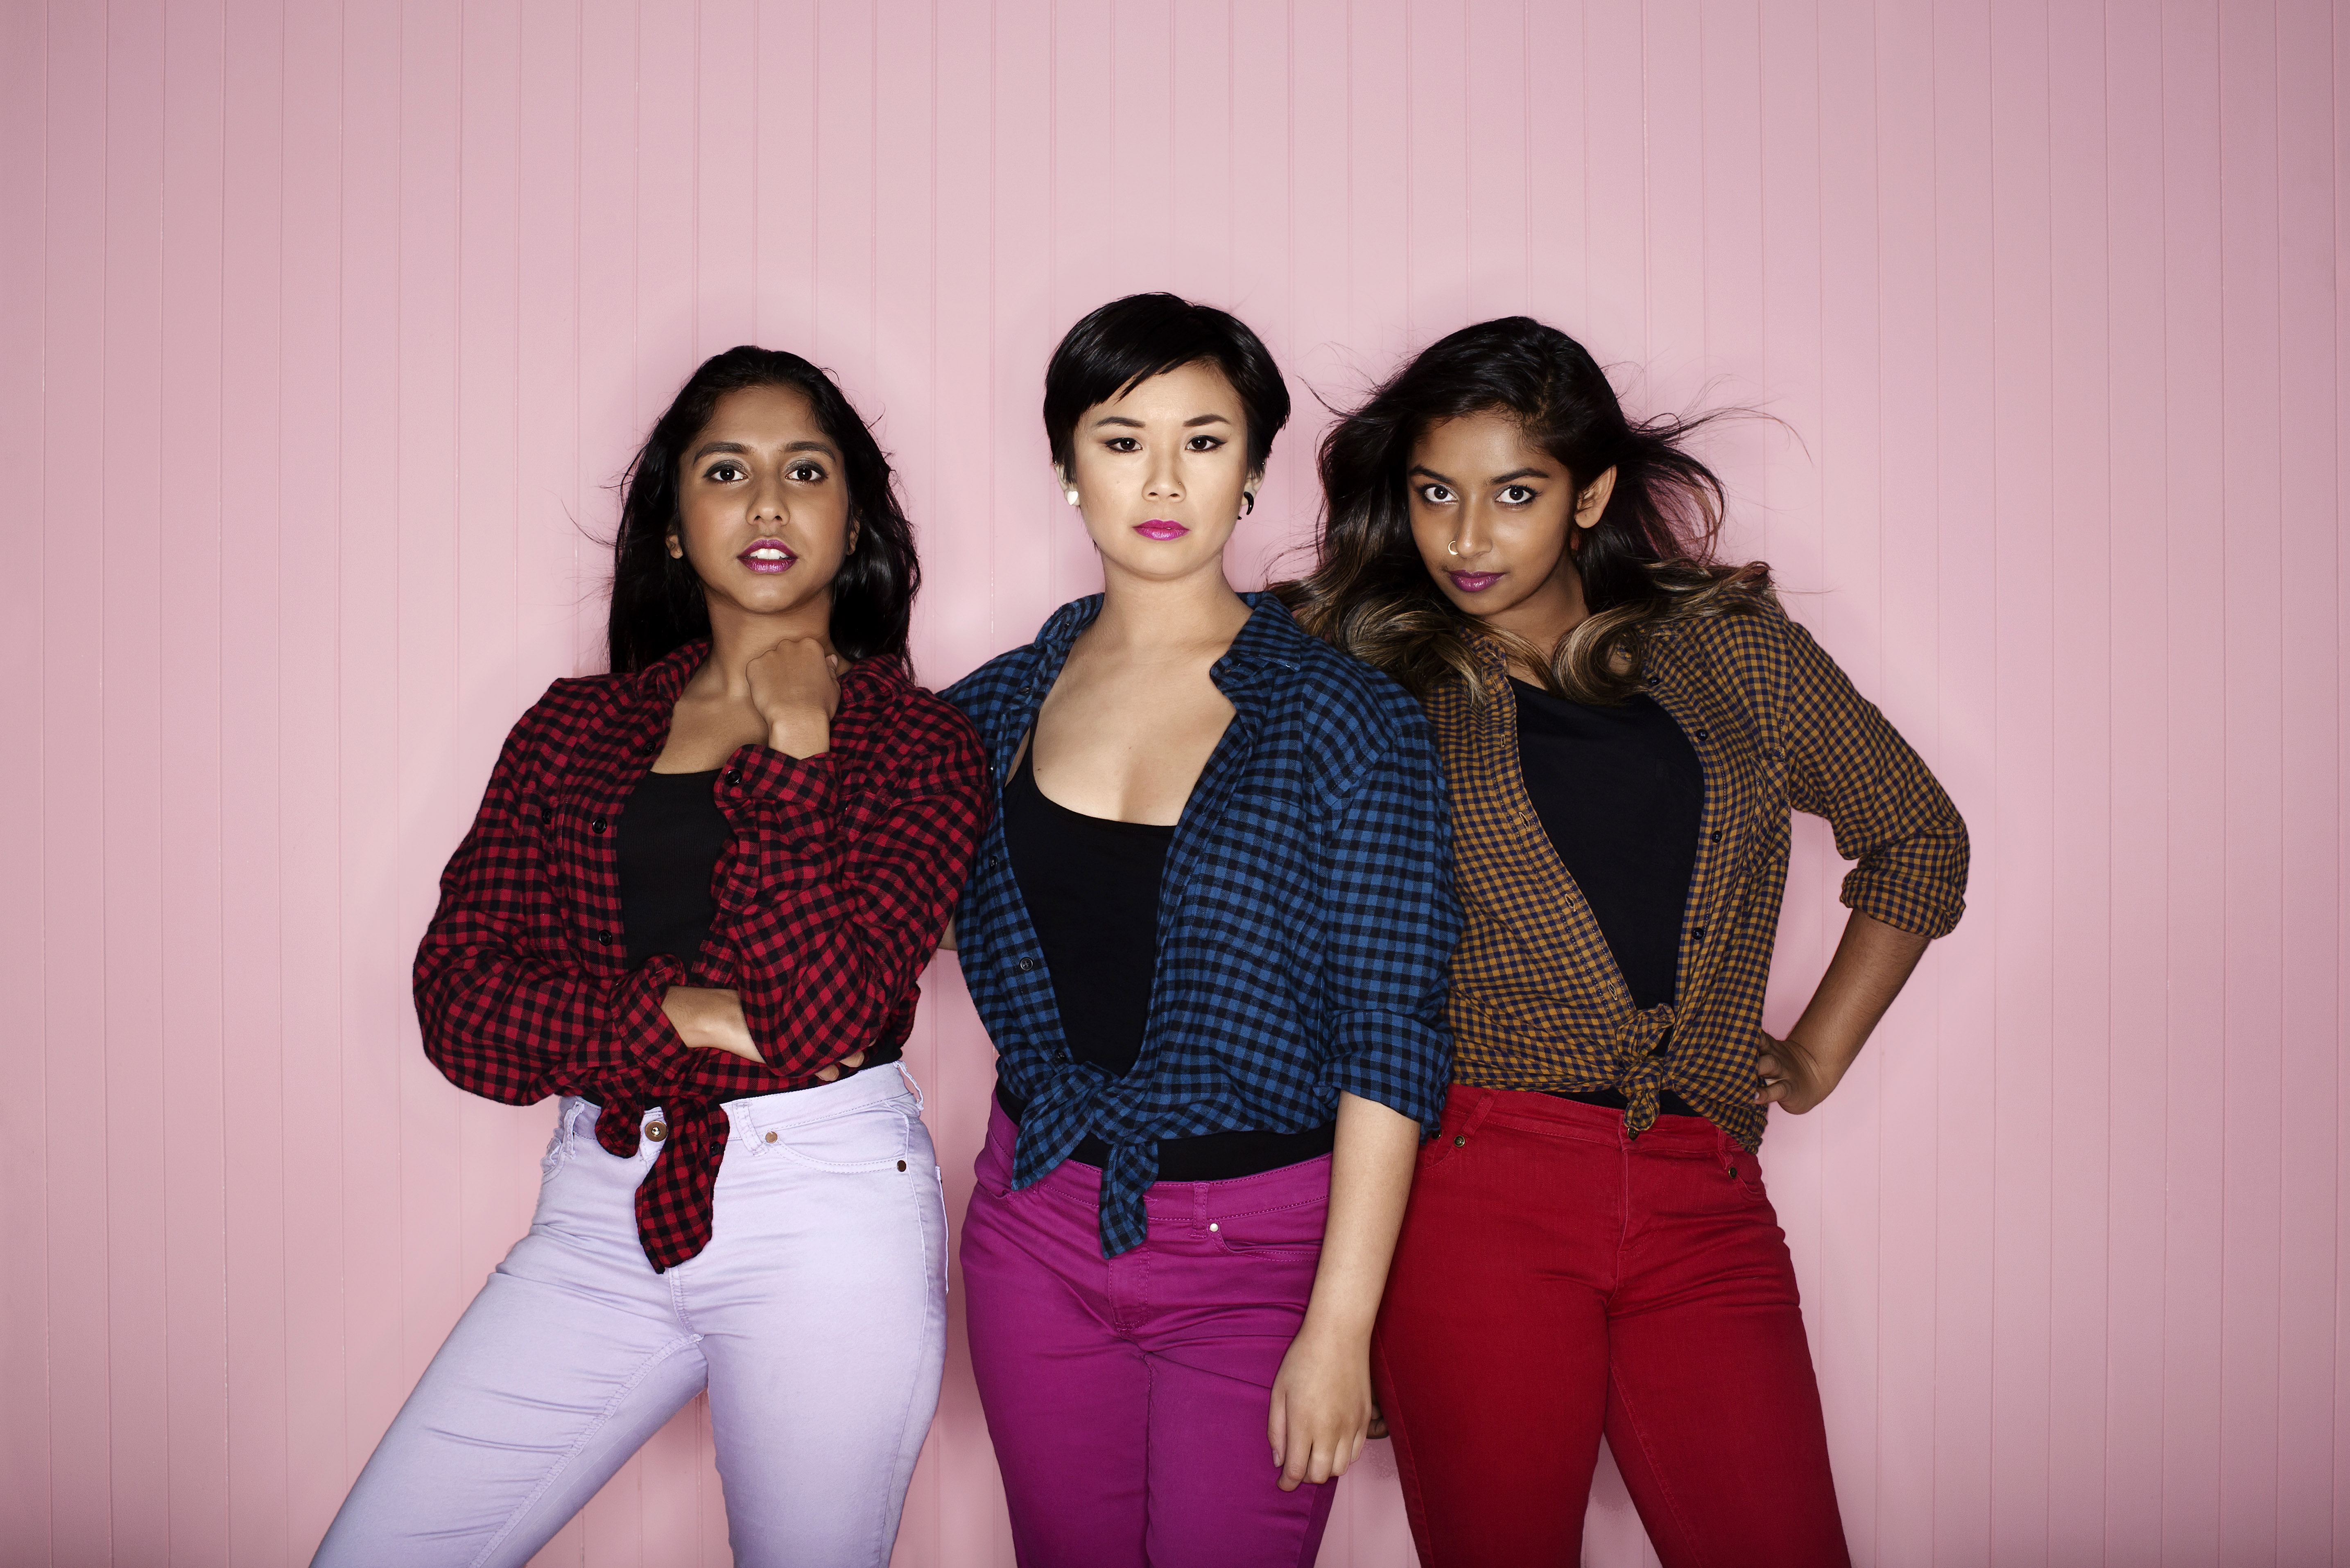 Three young women wearing matching flannel shirts, bright pink lipstick and brightly coloured jeans stand against a pale pink wall. They are posing and staring defiantly at the camera as their hair is blown back by a breeze or fan.